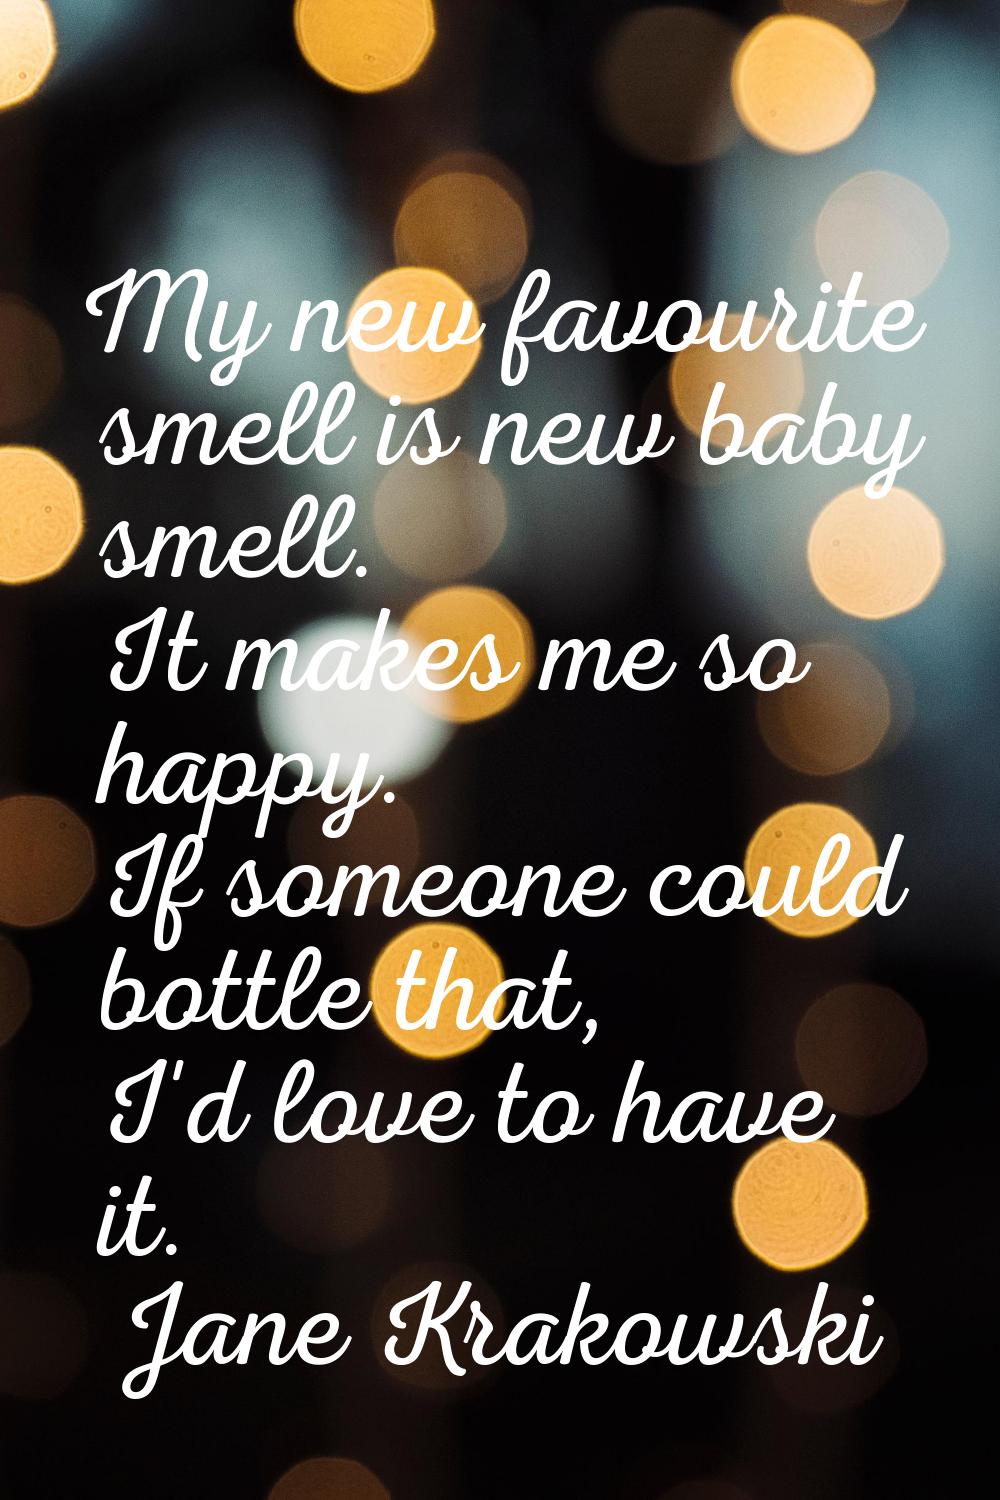 My new favourite smell is new baby smell. It makes me so happy. If someone could bottle that, I'd l